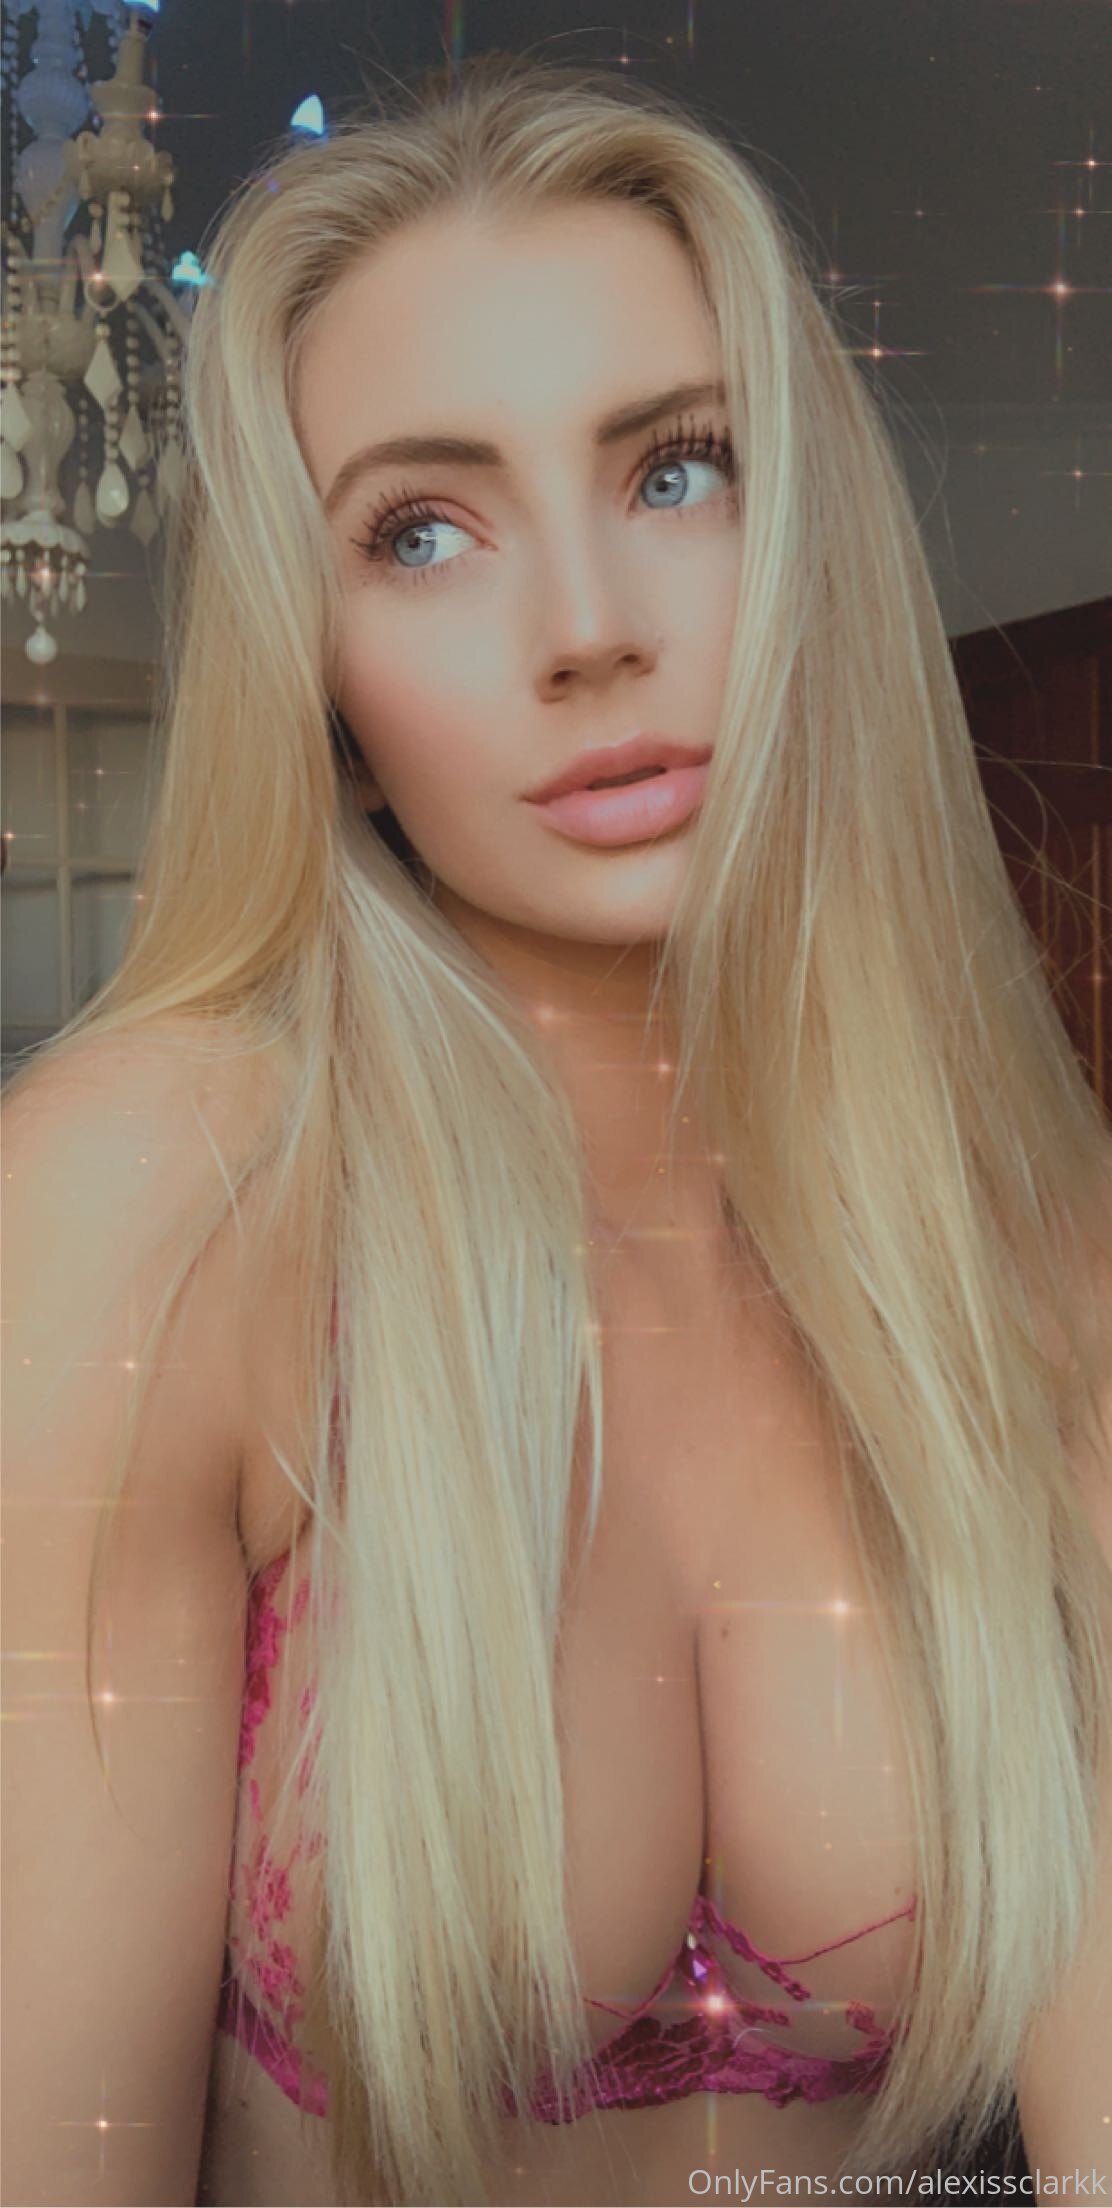 Alexis clark leaked onlyfans